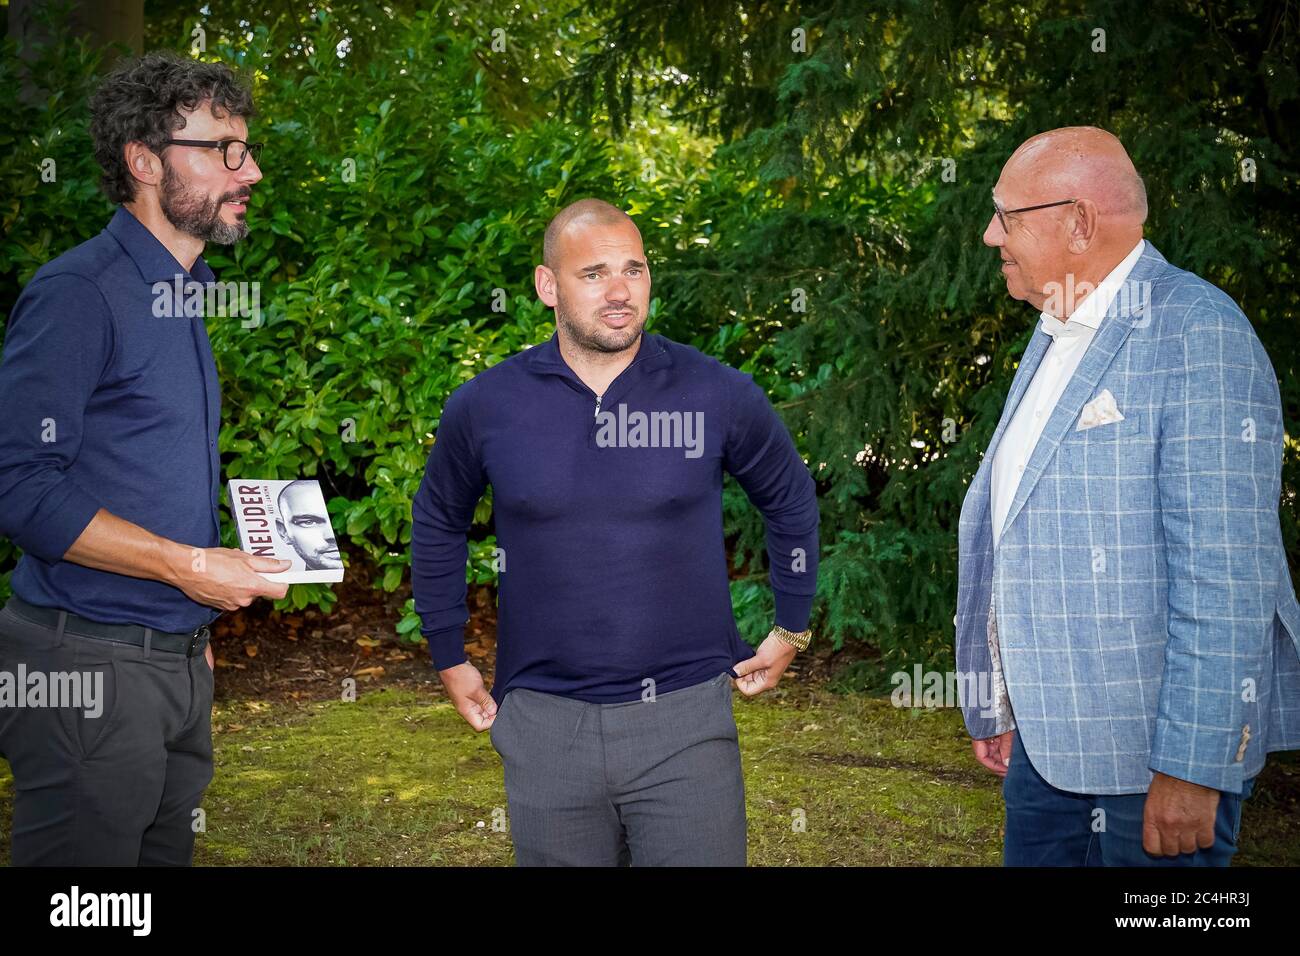 DOORN, Wesley Sneijder (M) presents his book Wesley, a biography written by Kees Jansma (R), Mark van Bommel (L) presents the book, 27-06-2020, Oranjerie Doorn Credit: Pro Shots/Alamy Live News Stock Photo